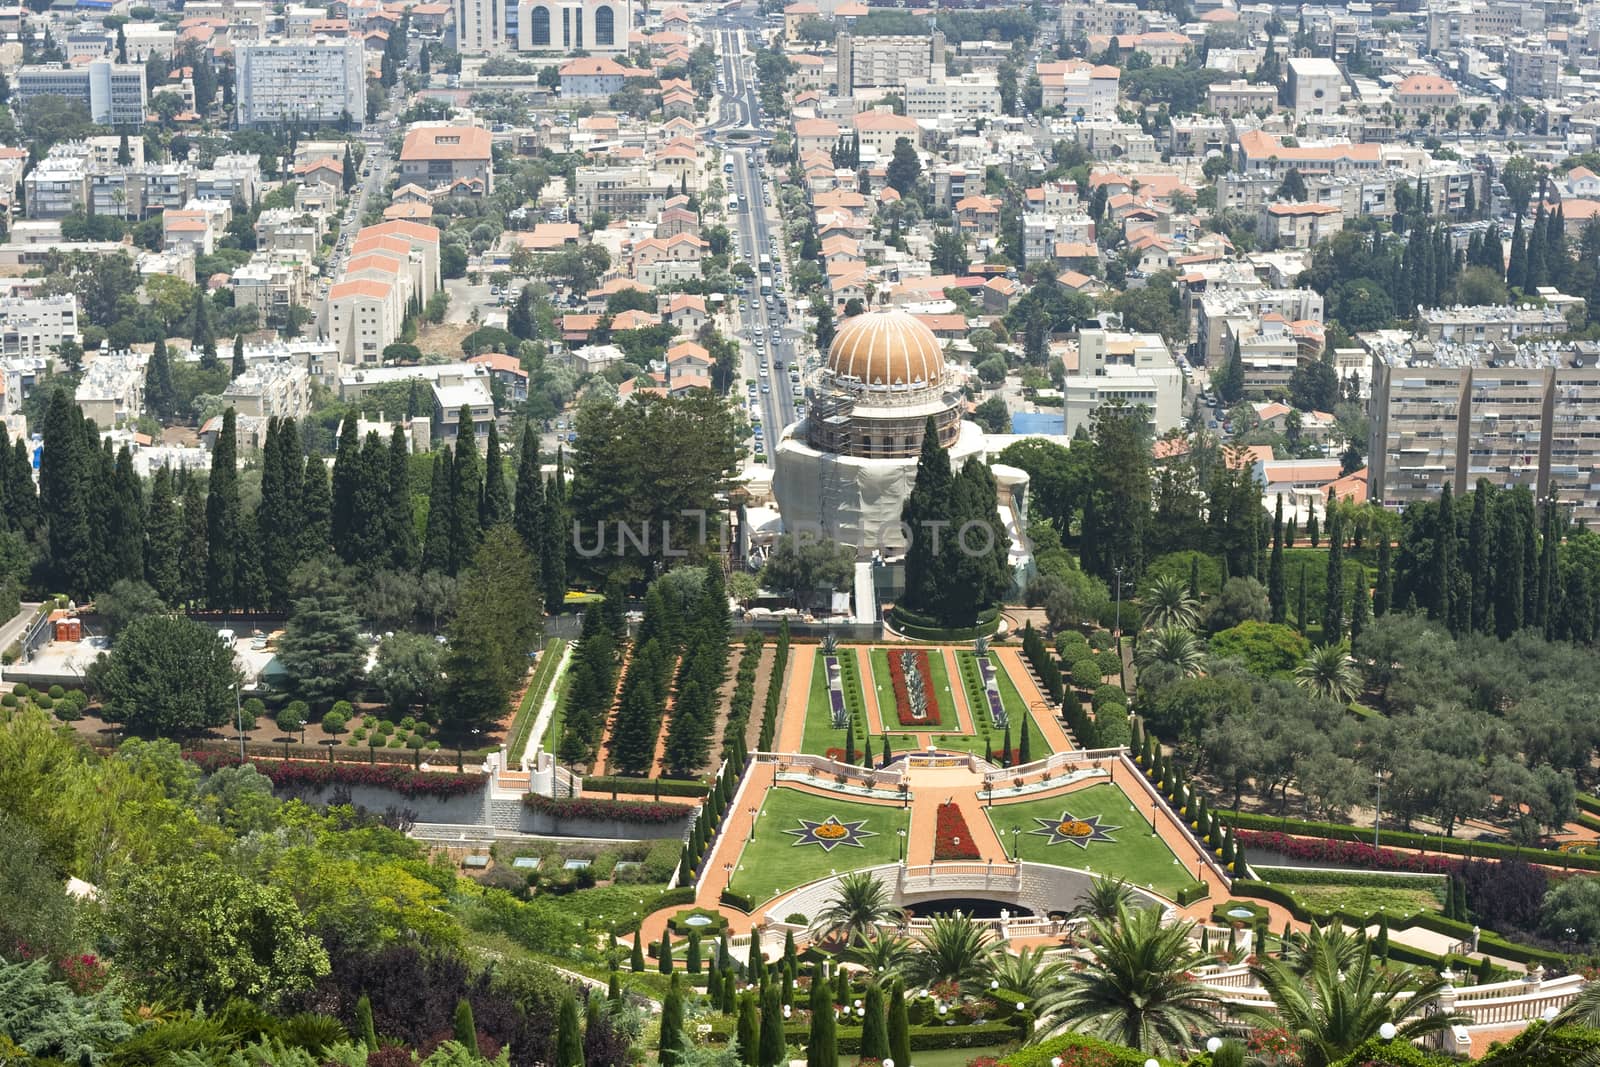 bahai temple in the city of haifa in israel with beautiful gardens surrounding